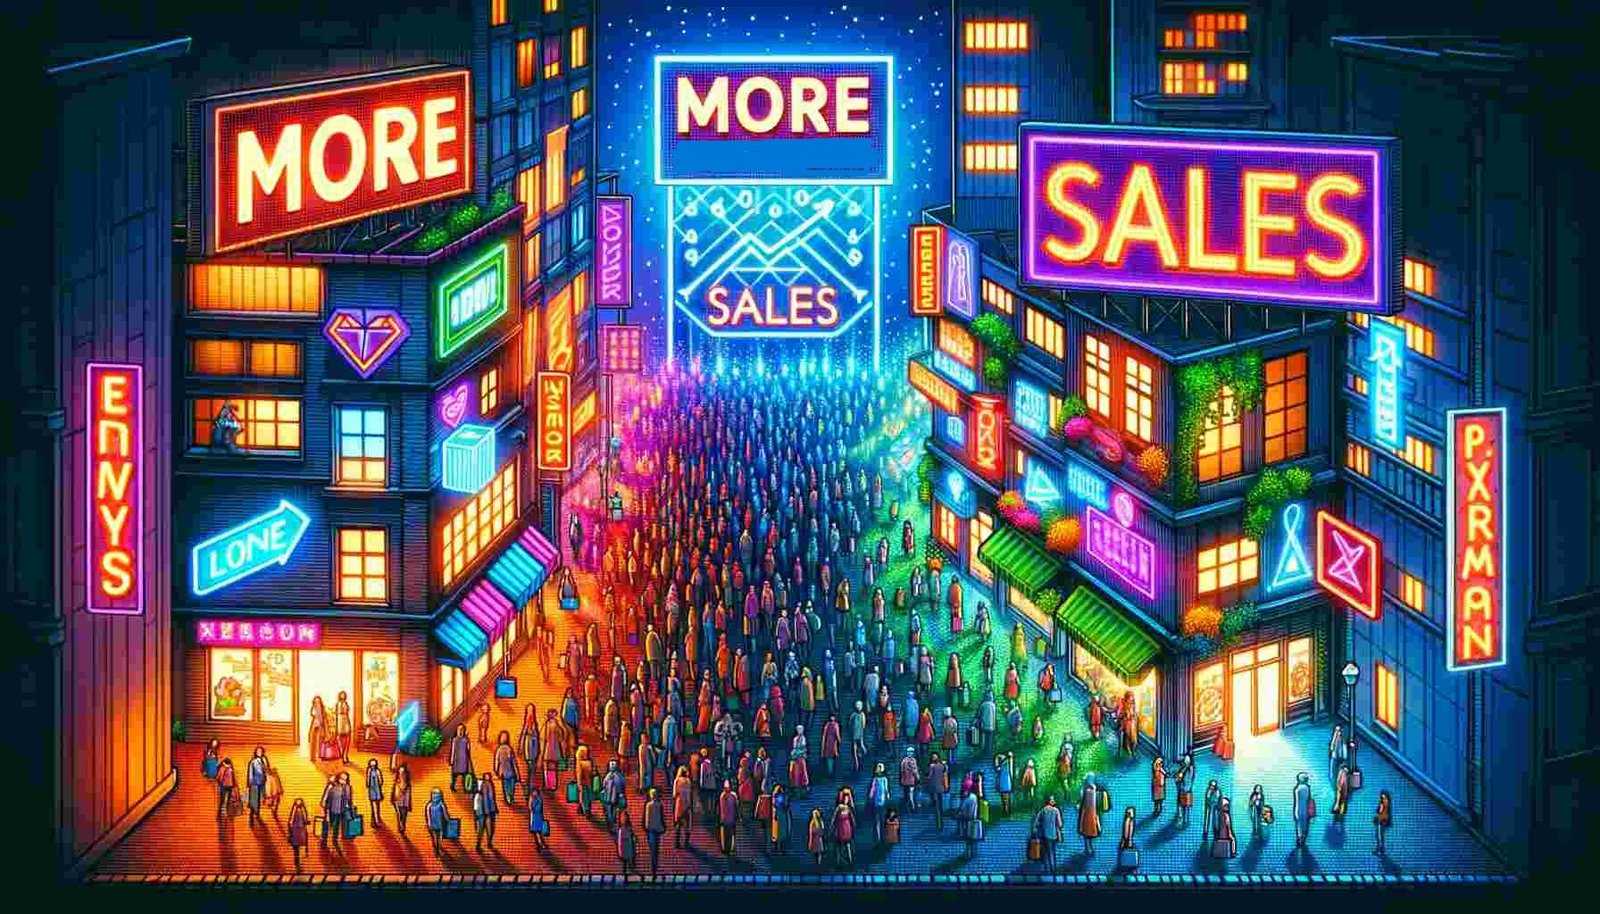 A-creative-vibrant-illustration-showcasing-the-concept-More-Advertising-Equals-More-Sales-in-a-landscape-format-compressed